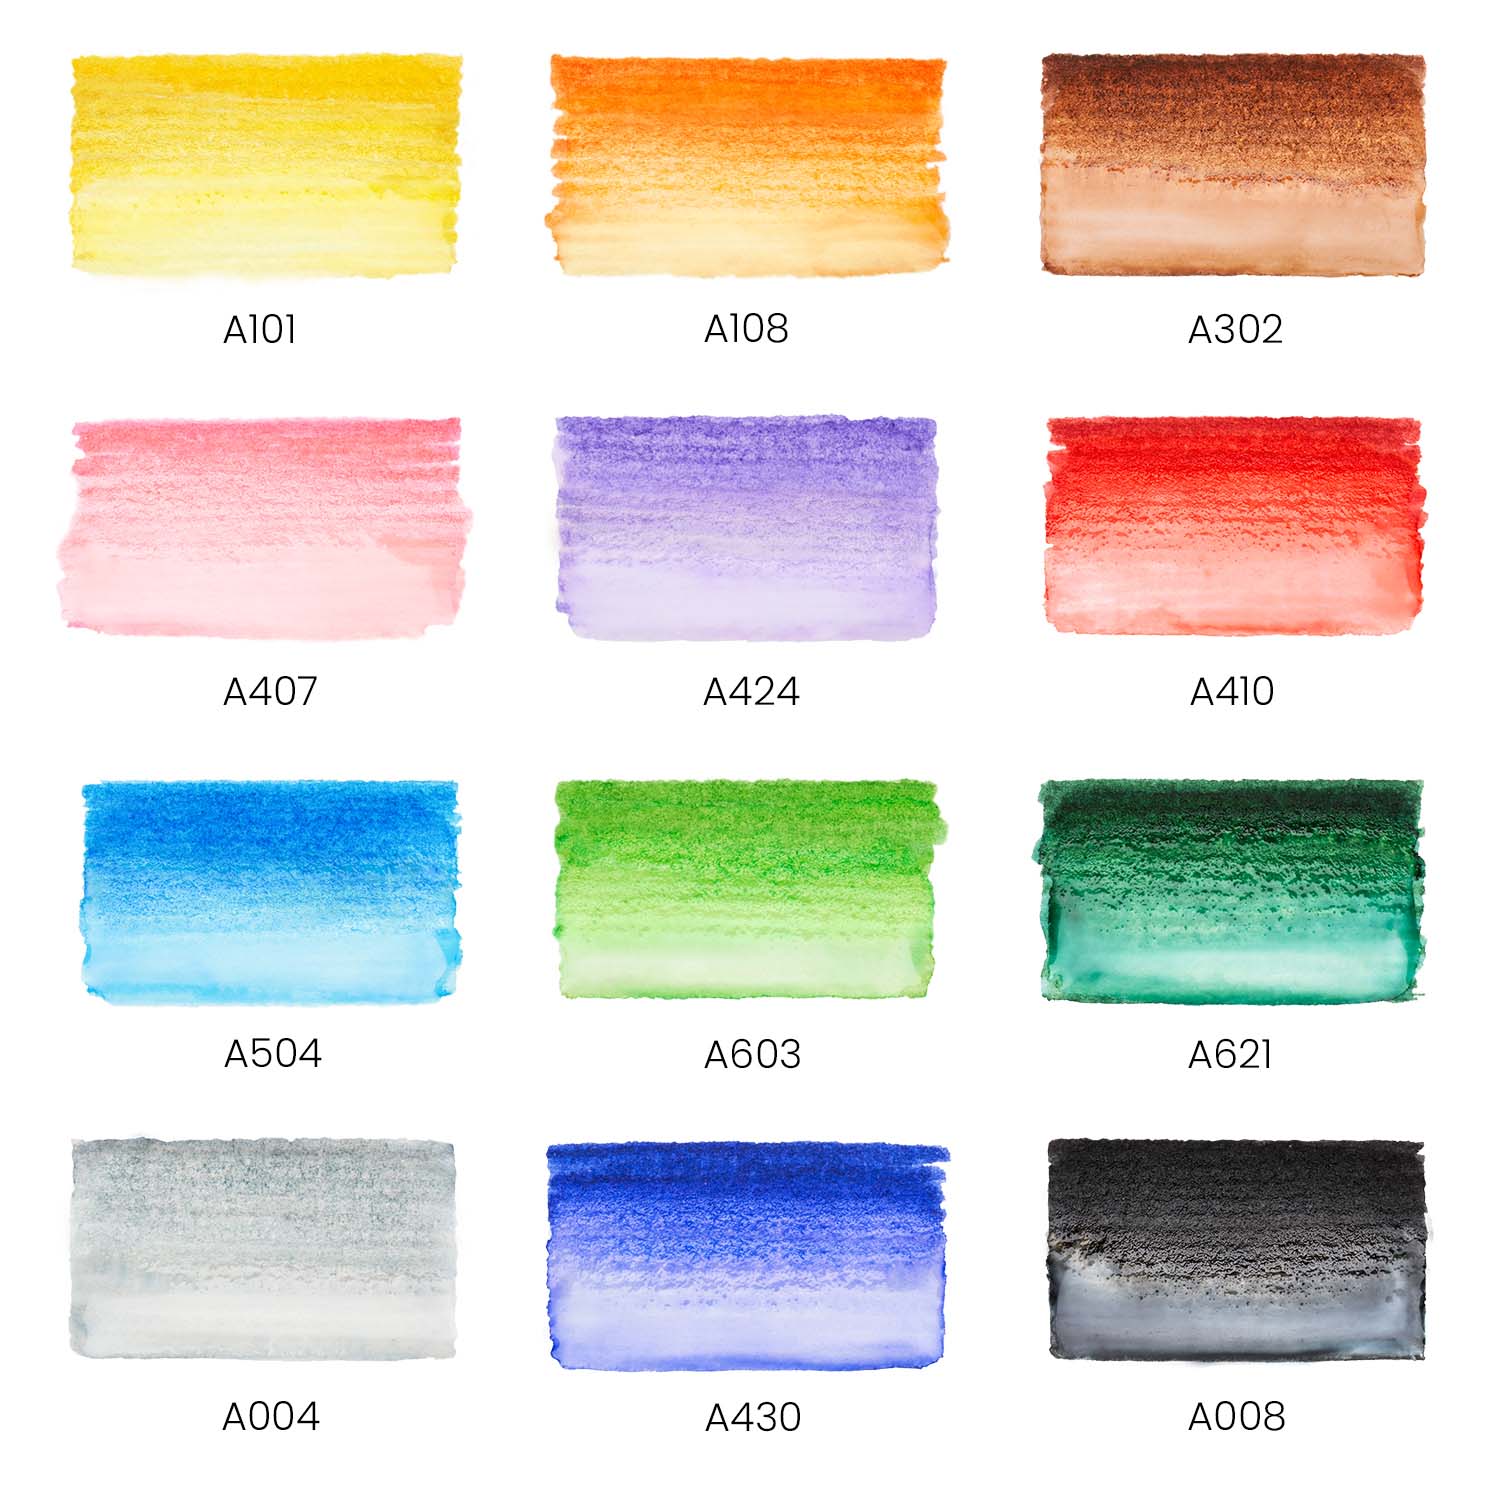 Arteza Real Brush Pens Set of 96 Colors Swatch Template DIY Single Page  Color Swatch Printable Digital PDF Template Instant Download (Download Now)  